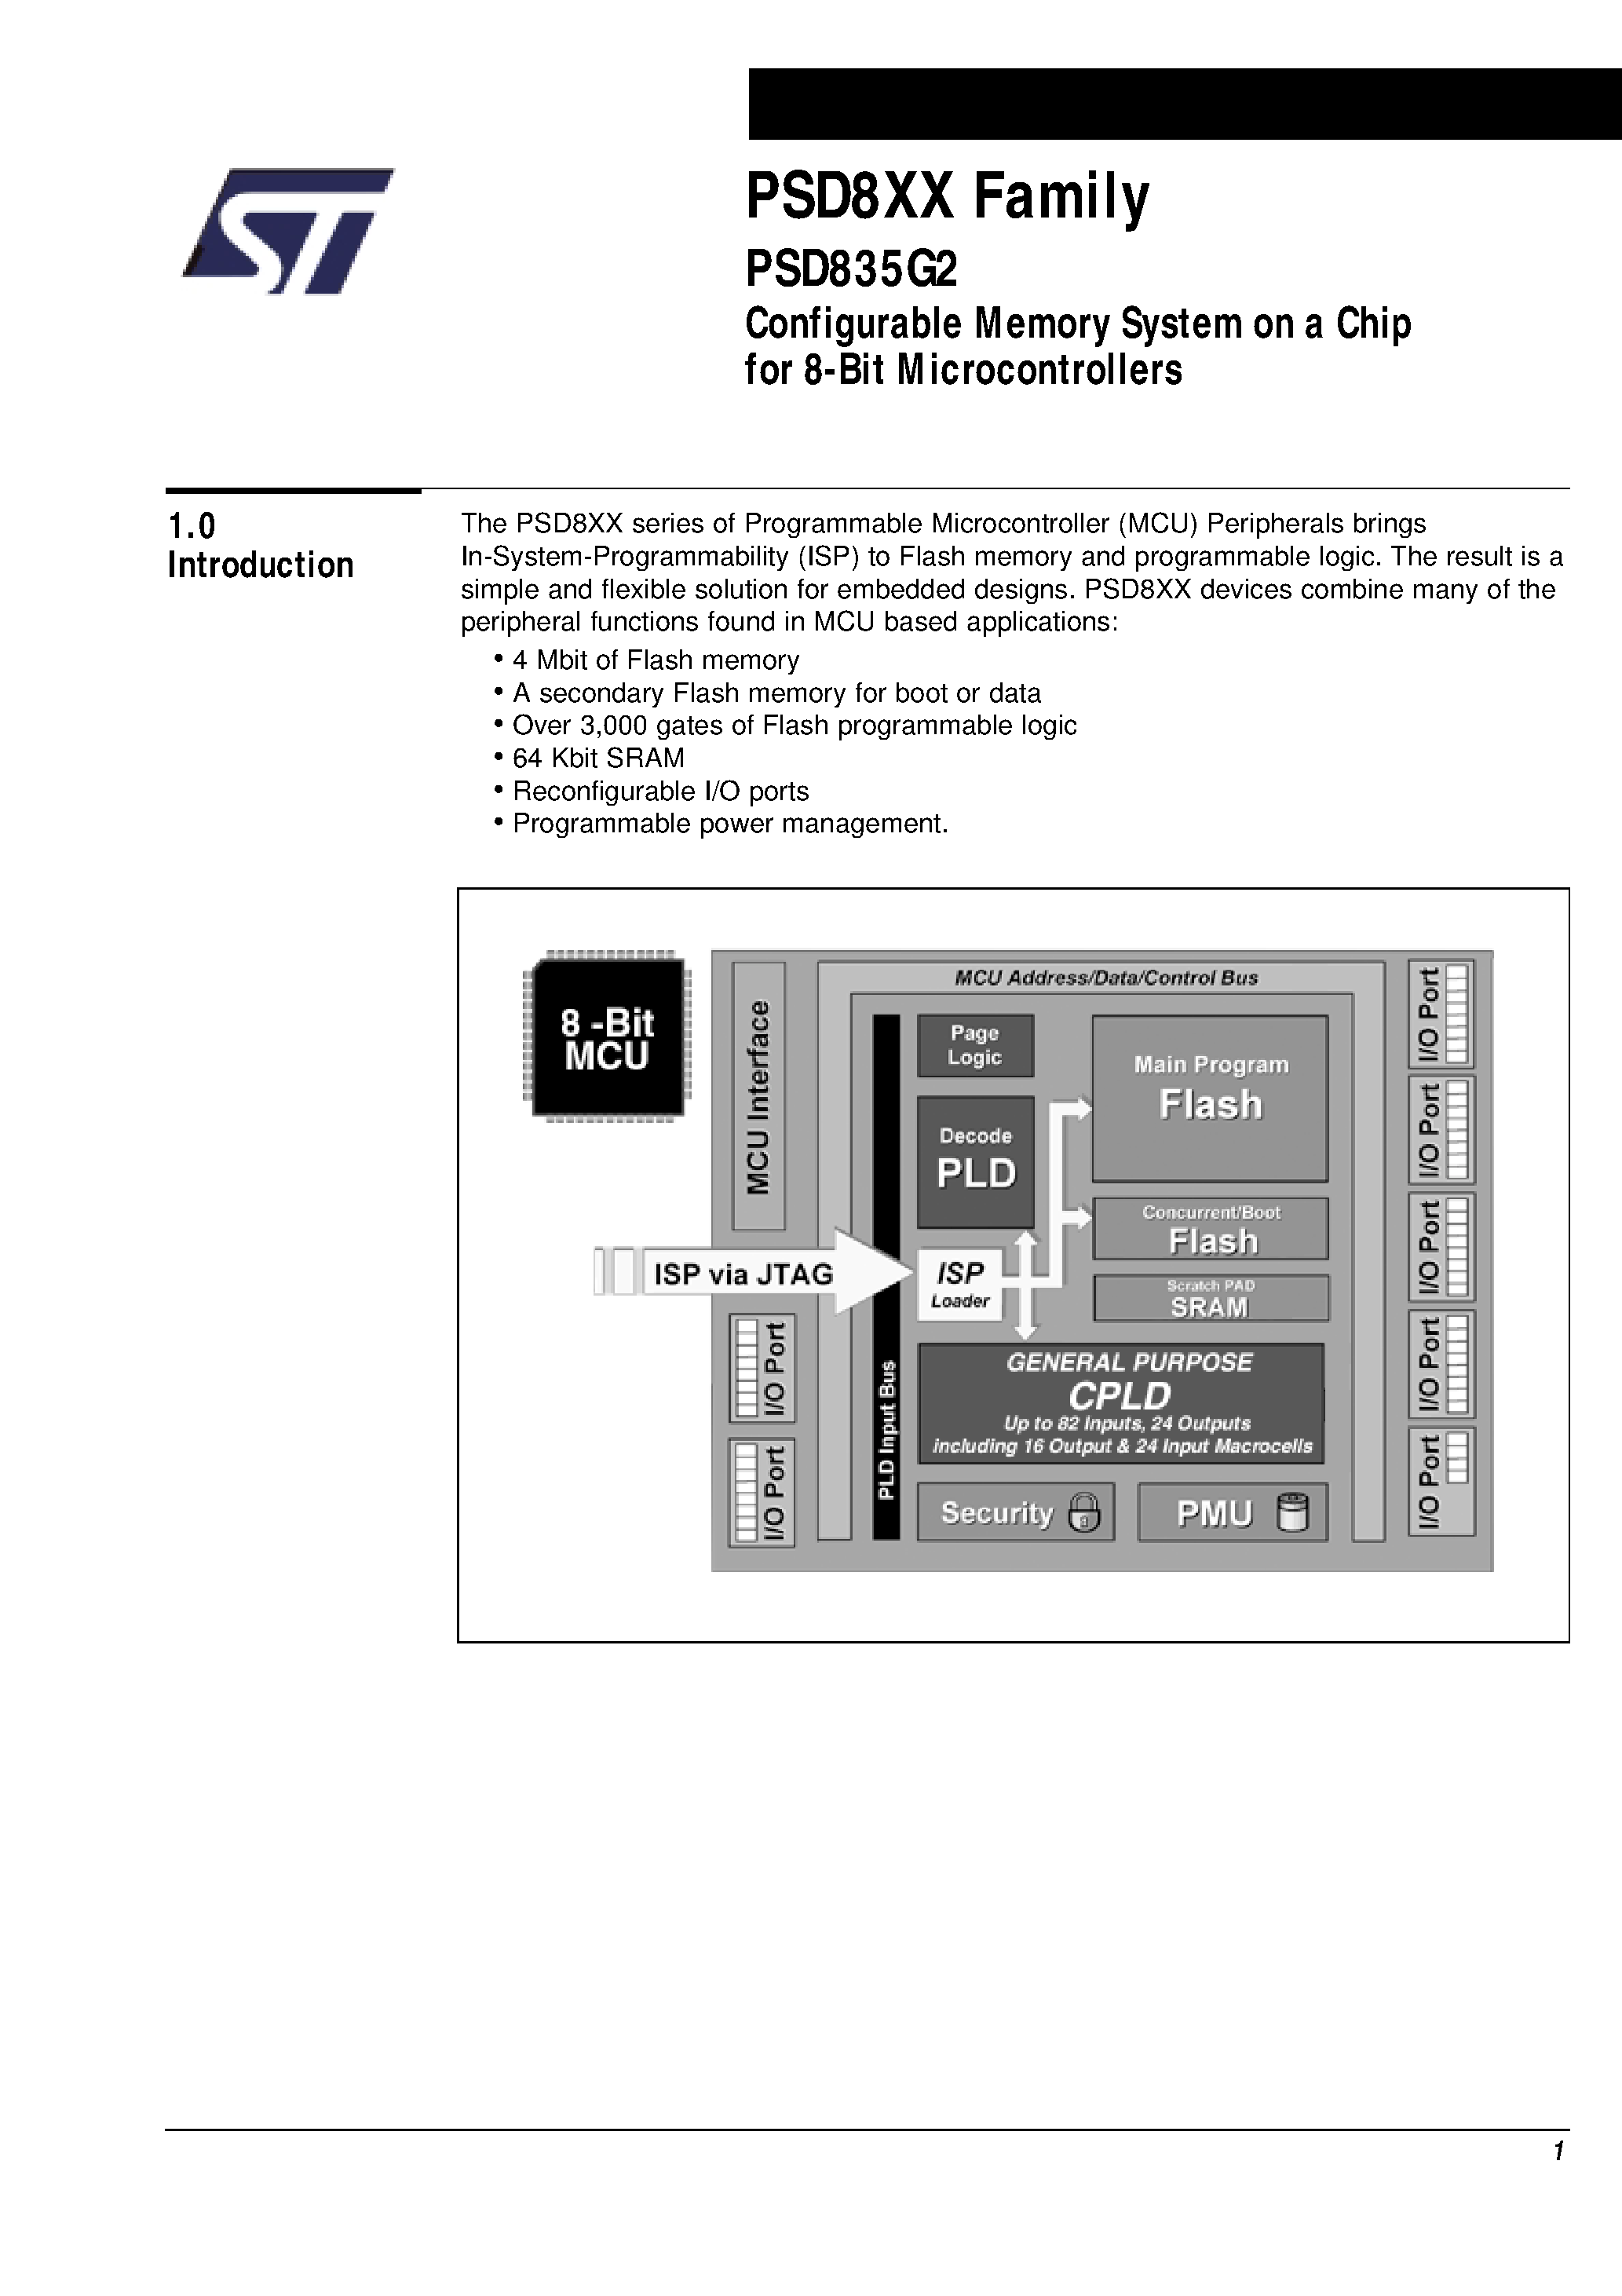 Datasheet PSD835F1-A-12JI - Configurable Memory System on a Chip for 8-Bit Microcontrollers page 2